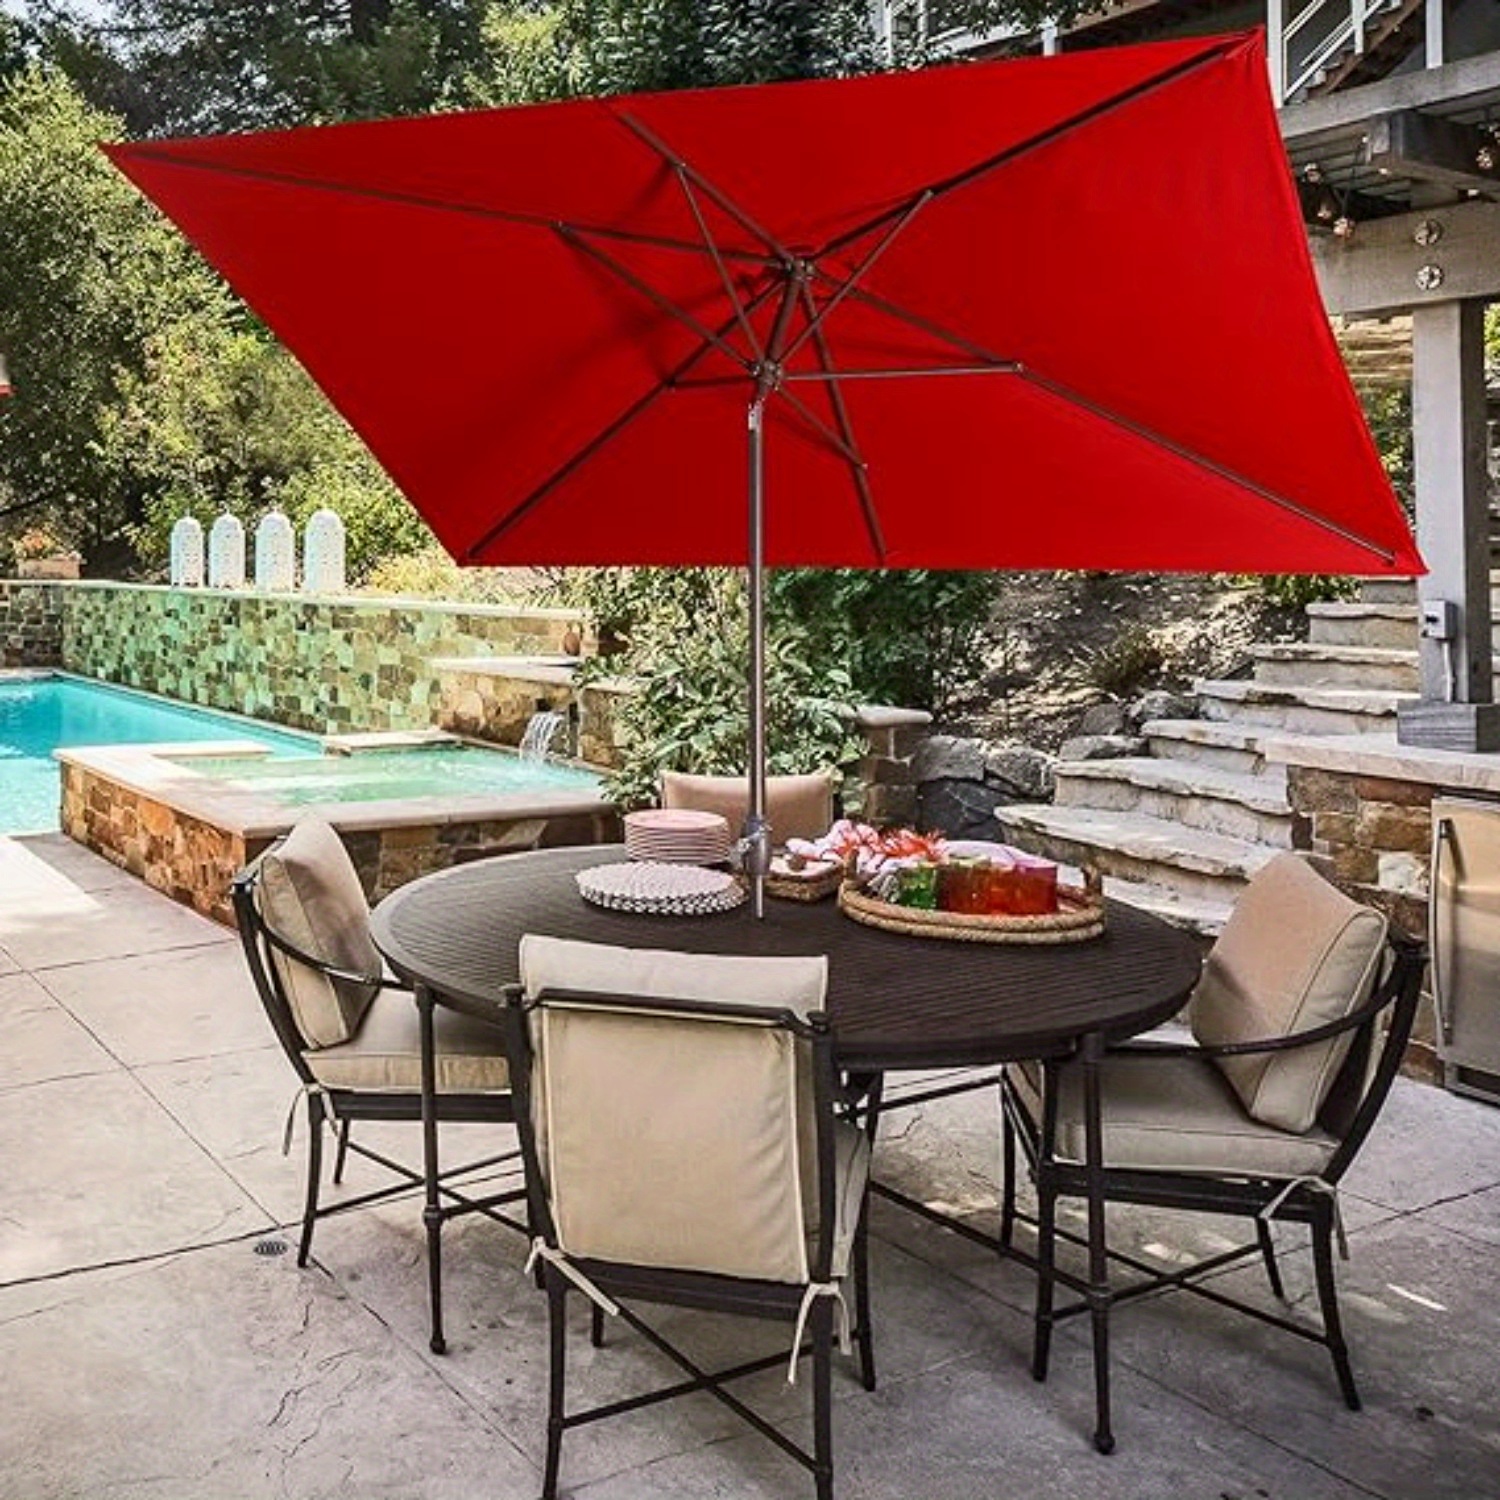 

Royalcraft Outdoor Patio Umbrellas For Deck, Lawn, Pool& Backyard, 6.5ft × 10ft